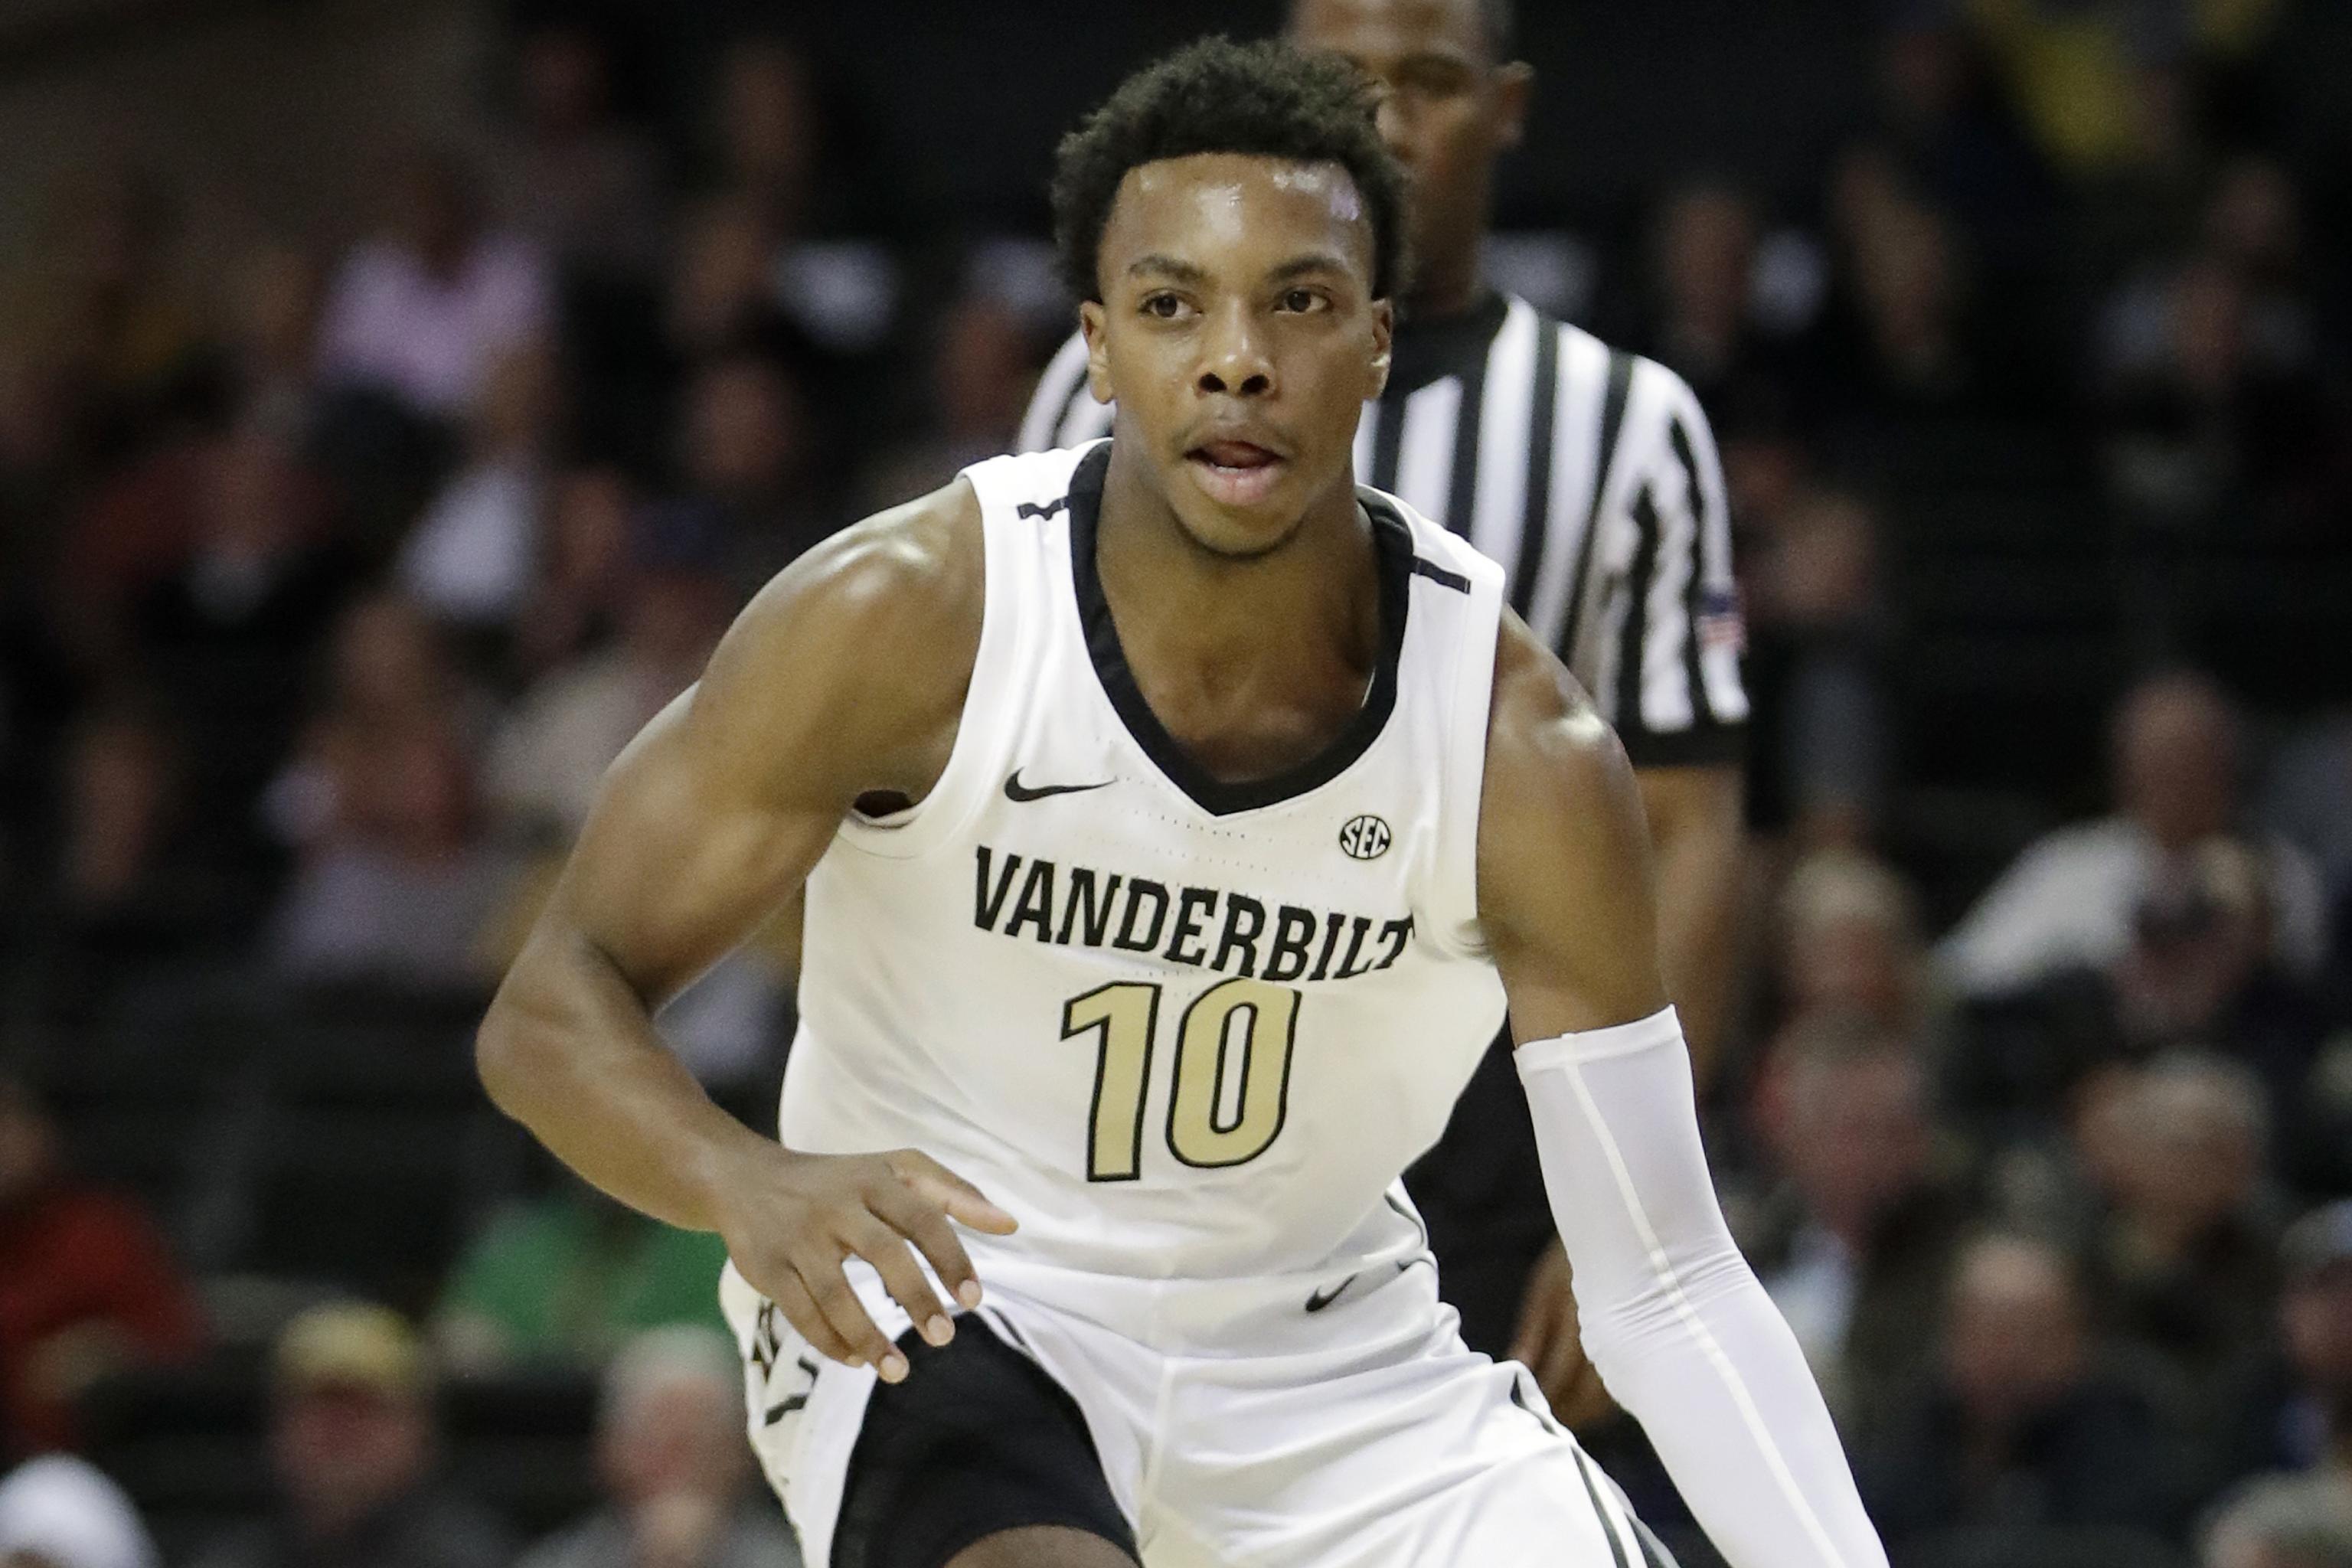 Nba Draft Combine S Biggest Mystery How Good Is Darius Garland Bleacher Report Latest News Videos And Highlights